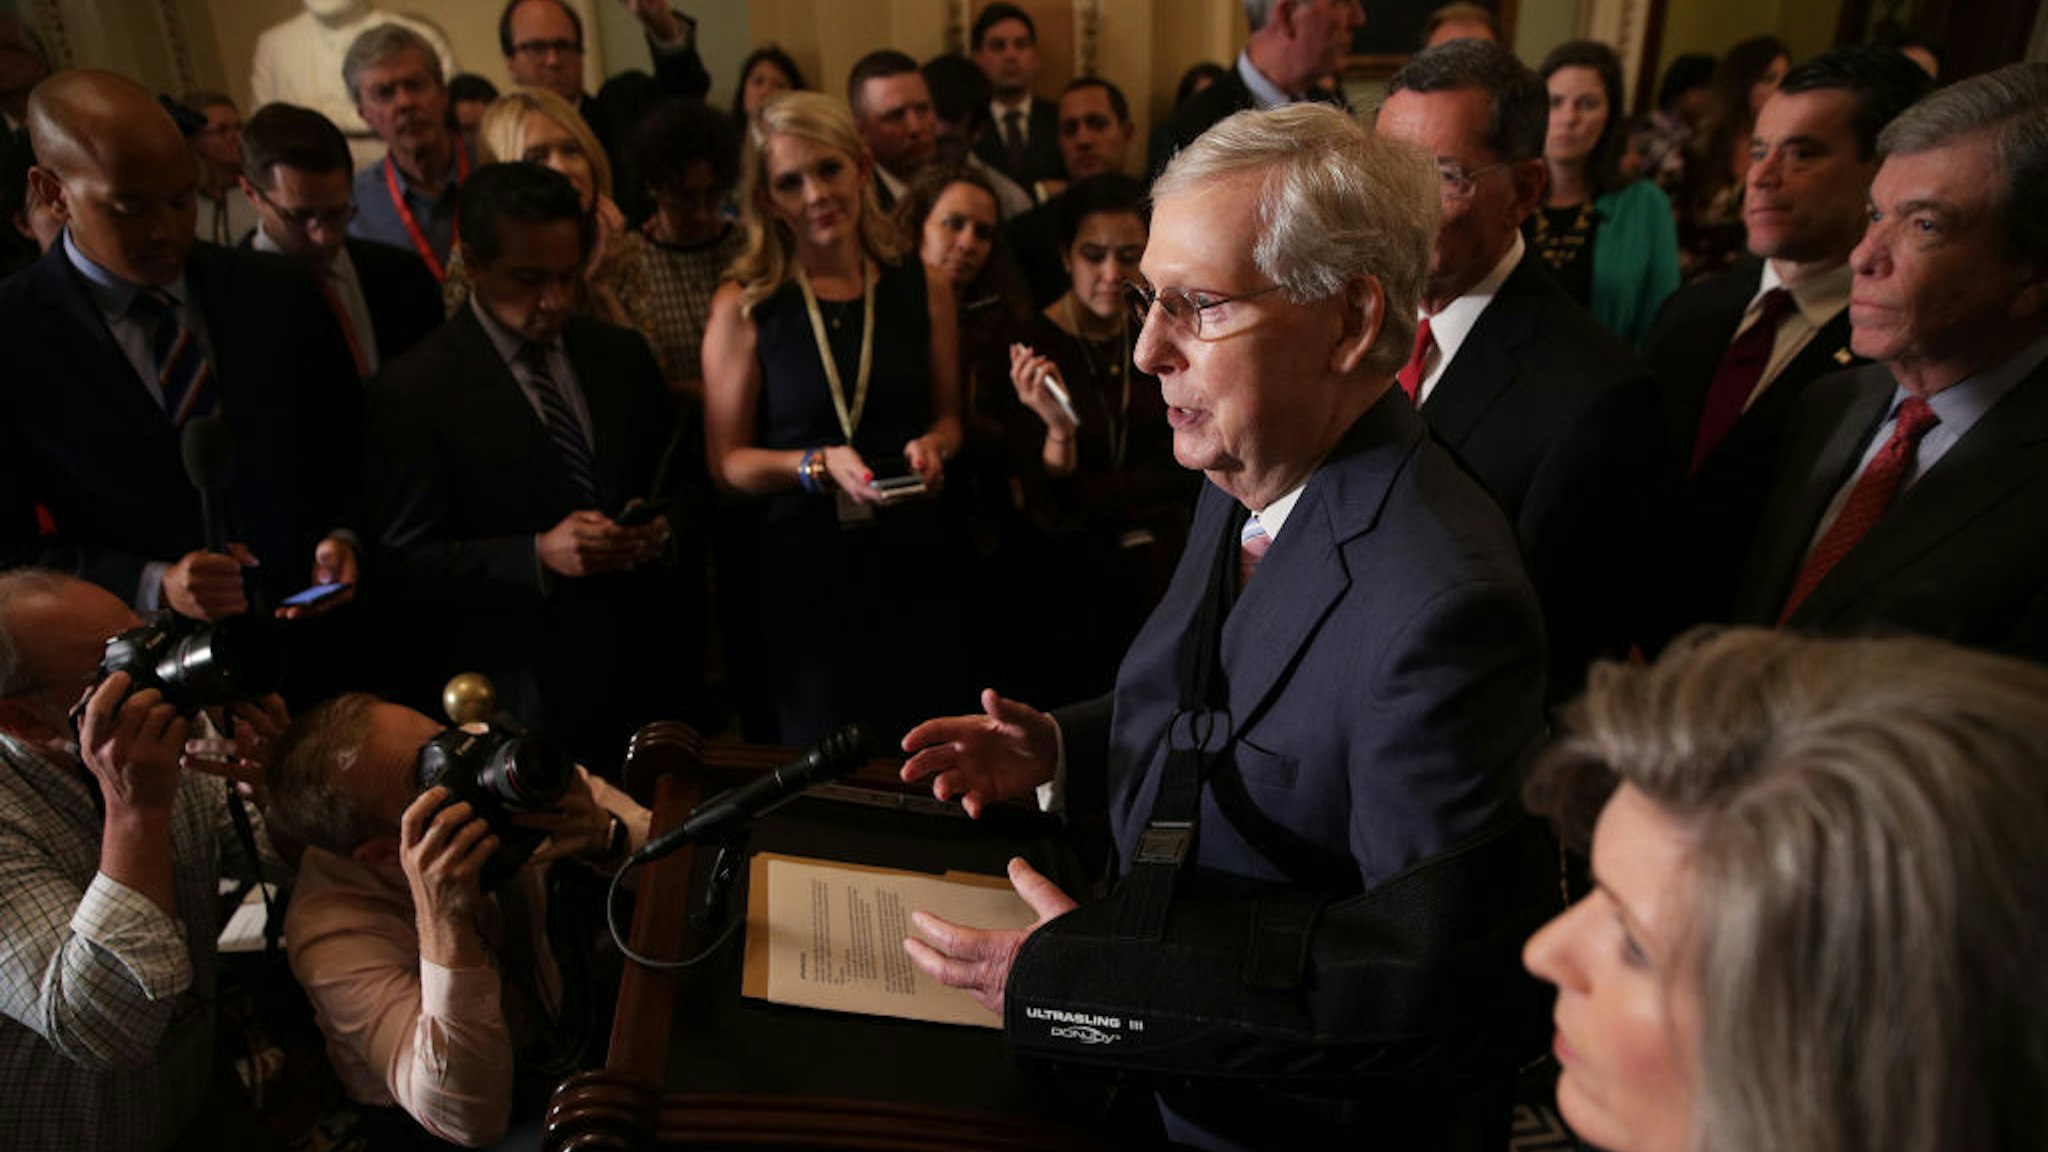 U.S. Senate Majority Leader Sen. Mitch McConnell (R-KY) speaks during a news briefing after the weekly Senate Republican policy luncheon September 10, 2019 at the U.S. Capitol in Washington, DC. Senate GOPs held the weekly luncheon to discuss Republican agenda. (Photo by Alex Wong/Getty Images)